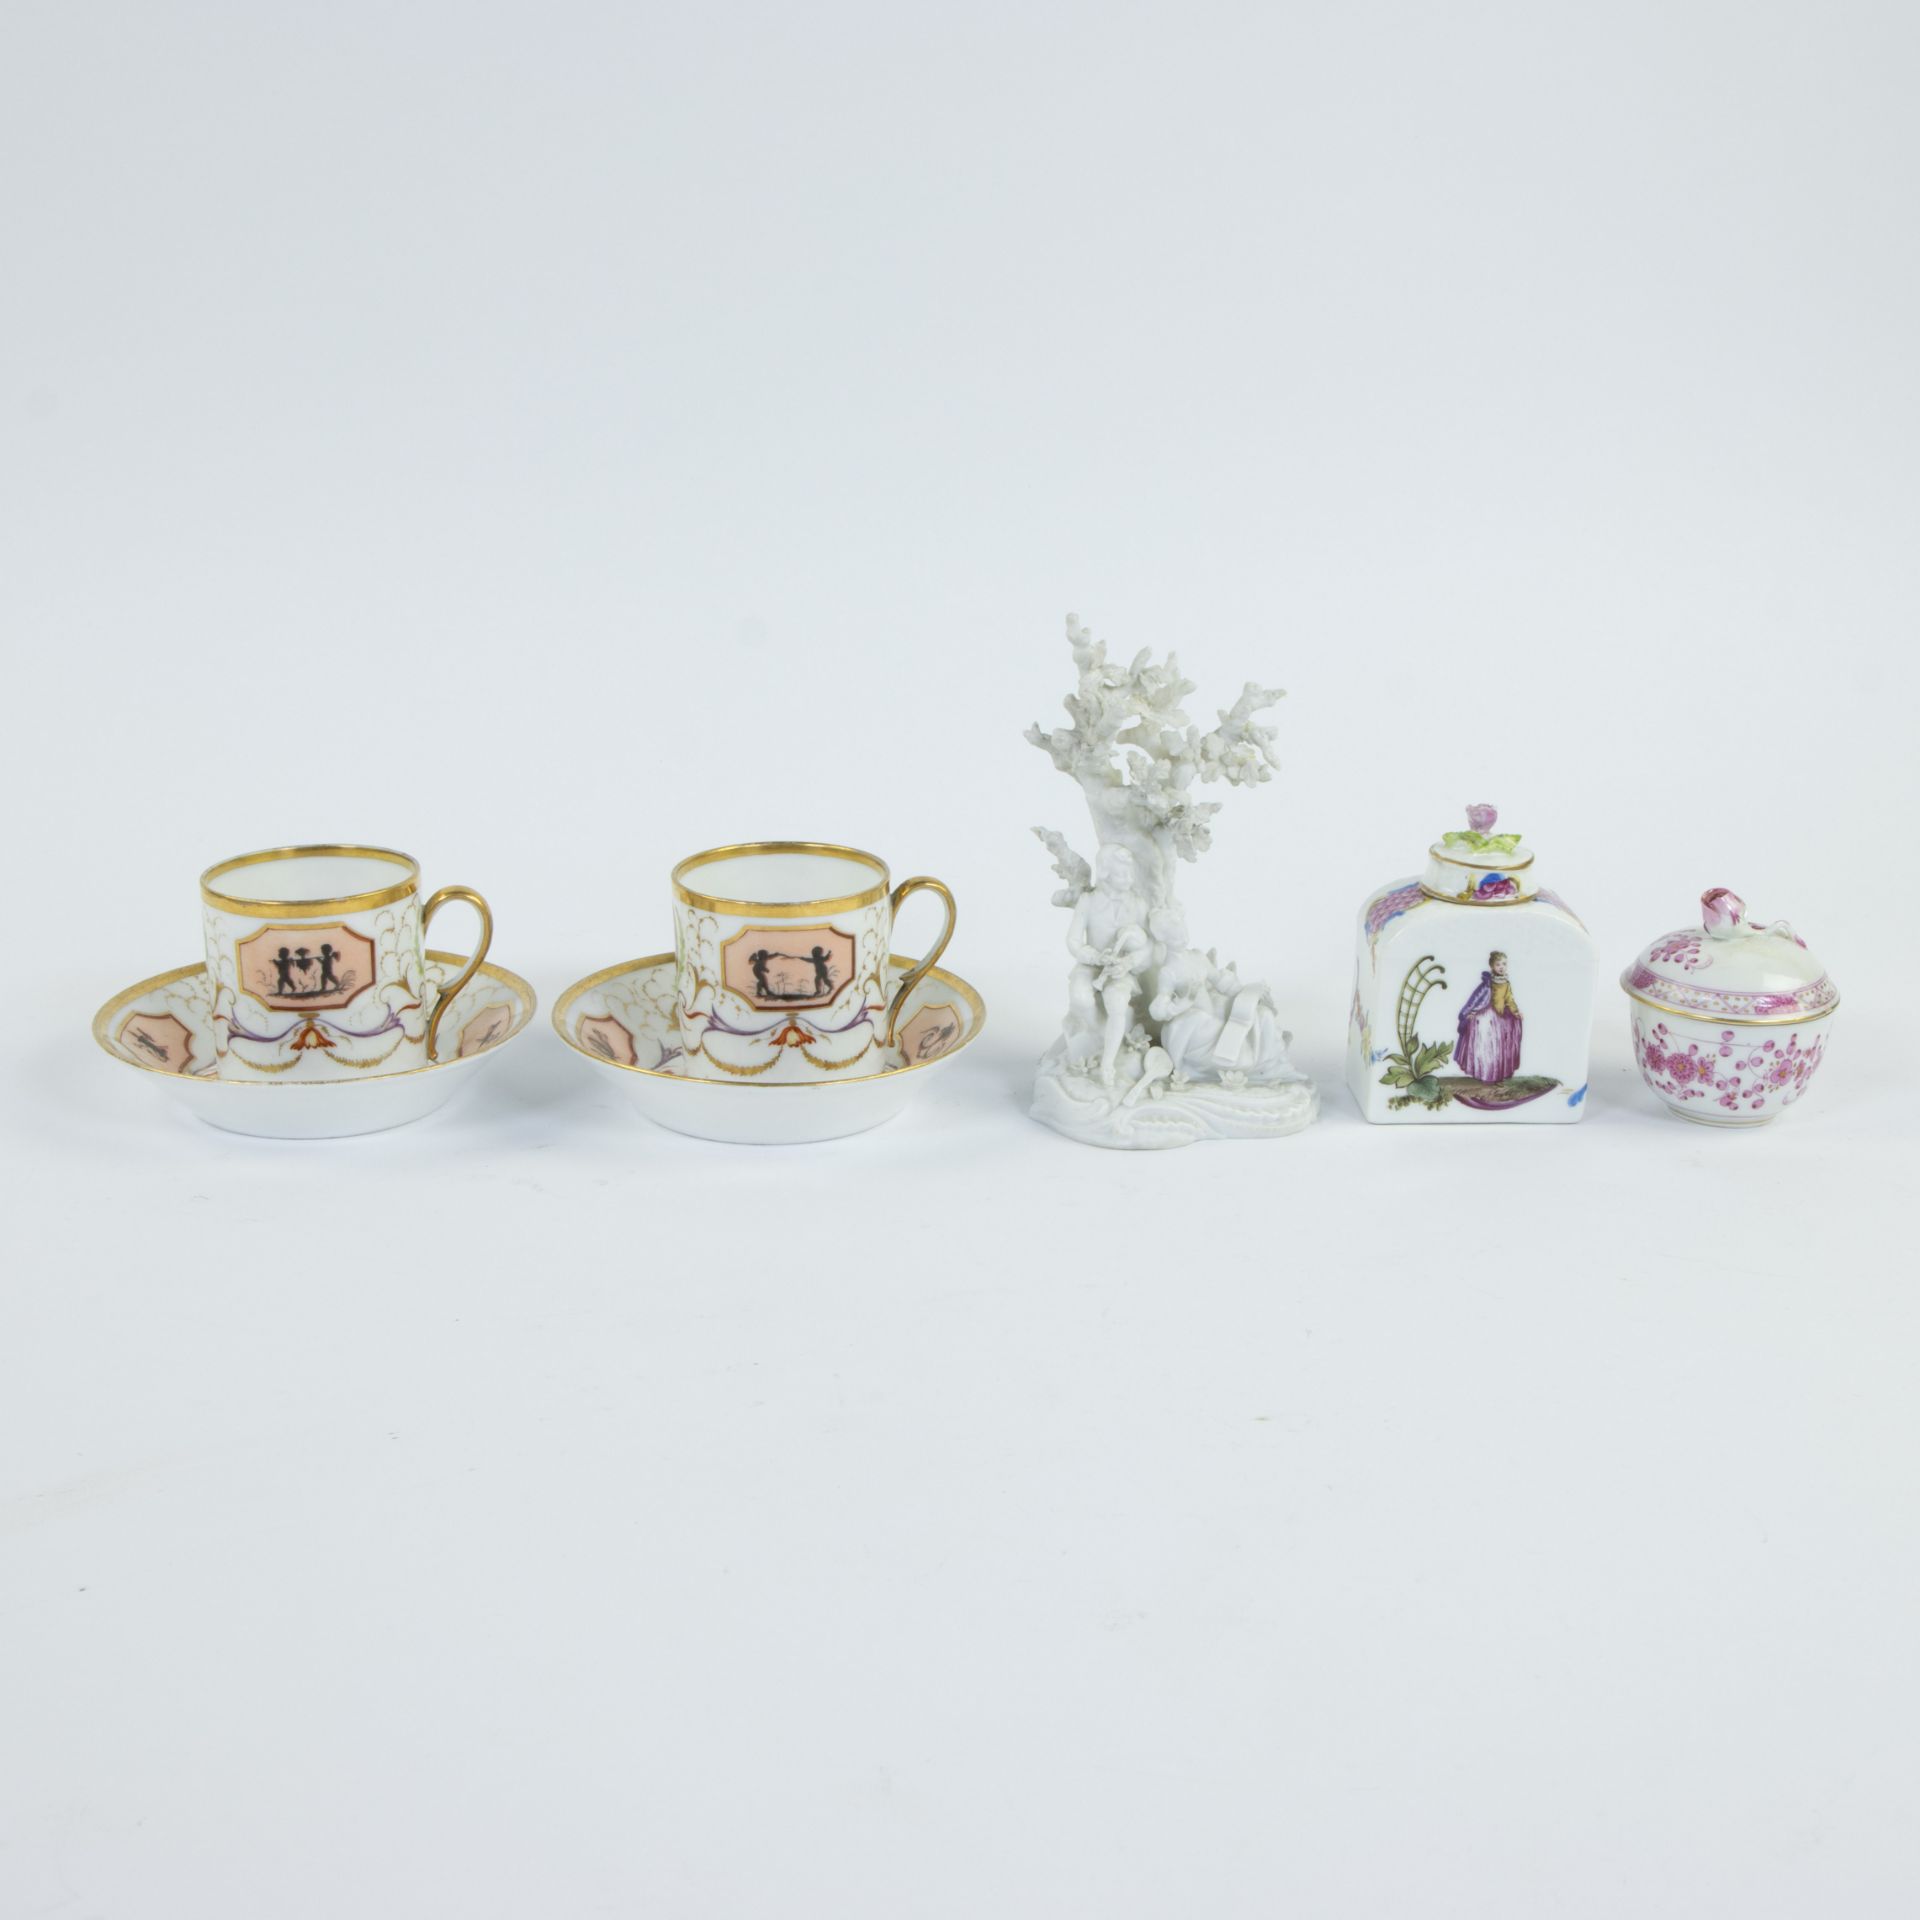 Collection of porcelain: 2 cups early 19th century Paris, tea caddy Meissen 18th century, pastoral g